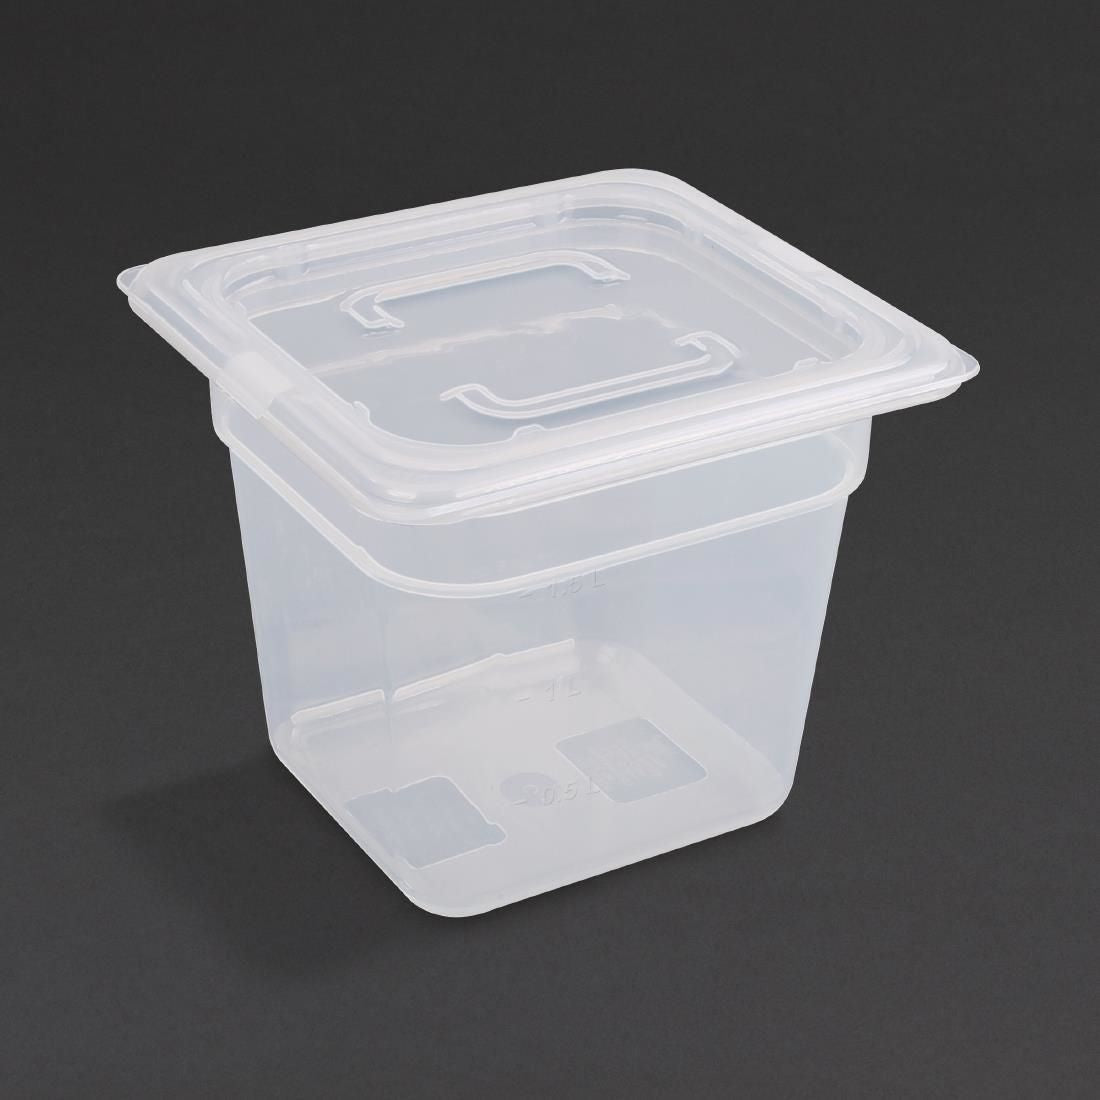 GJ527 Vogue Polypropylene 1/6 Gastronorm Container with Lid 150mm (Pack of 4) JD Catering Equipment Solutions Ltd